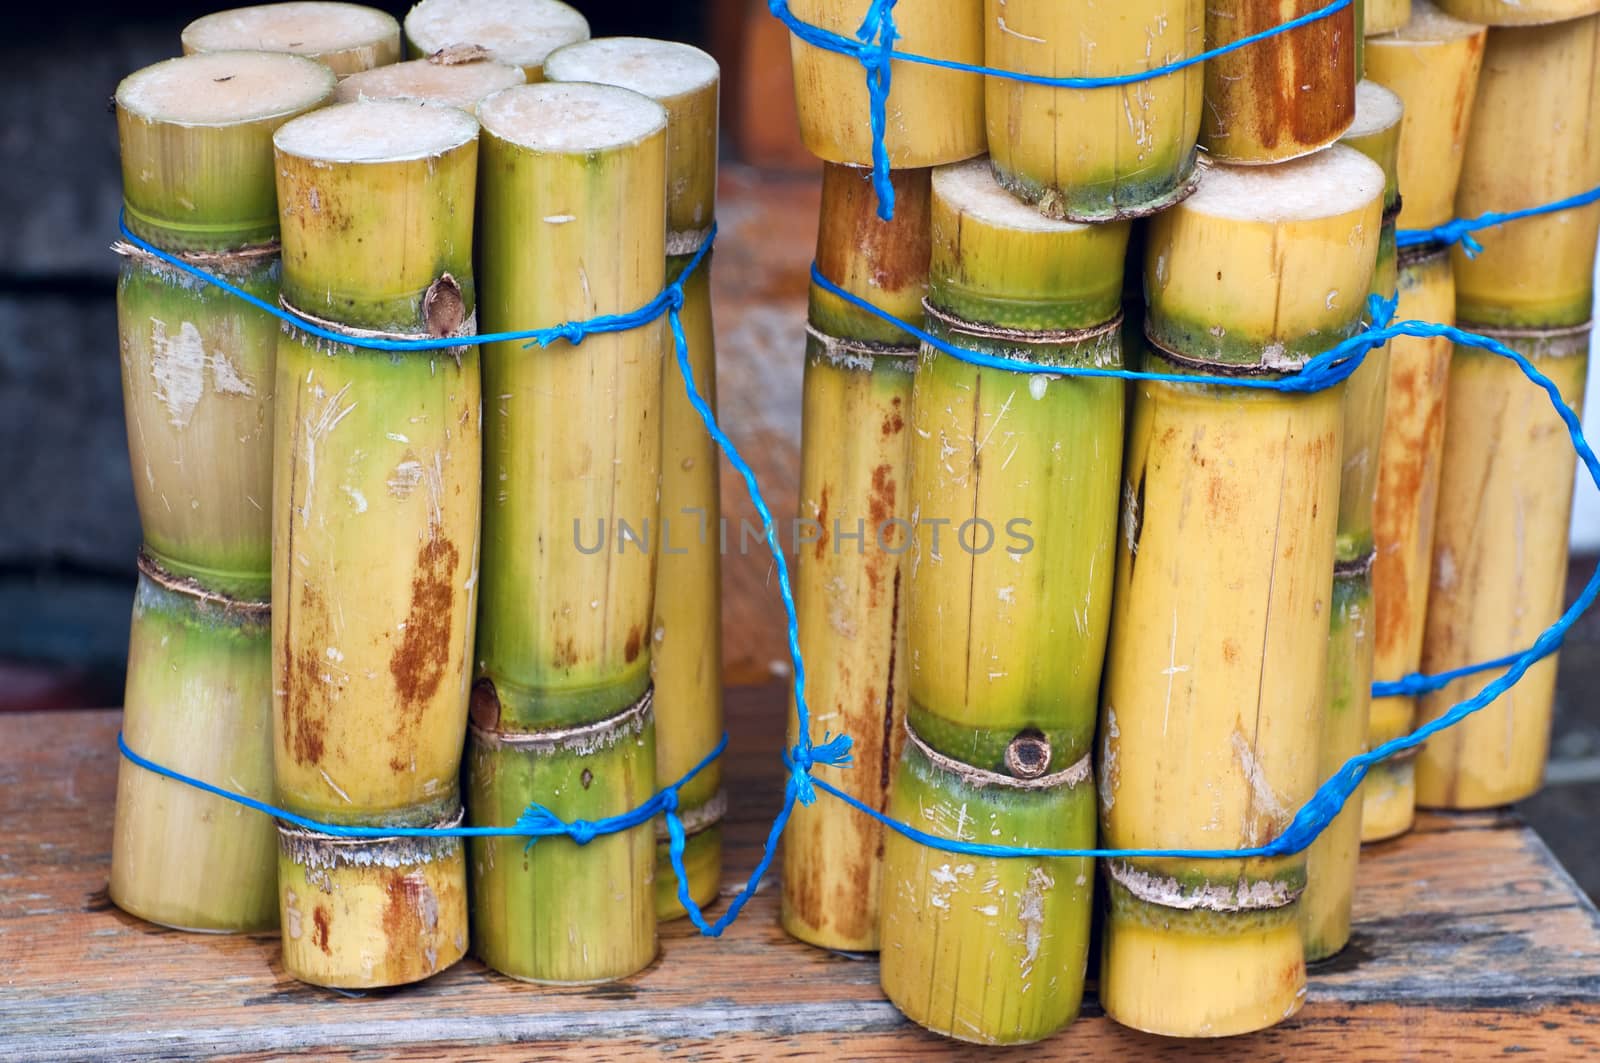 A close up photo of a stack of sugar cane sticks  by xura